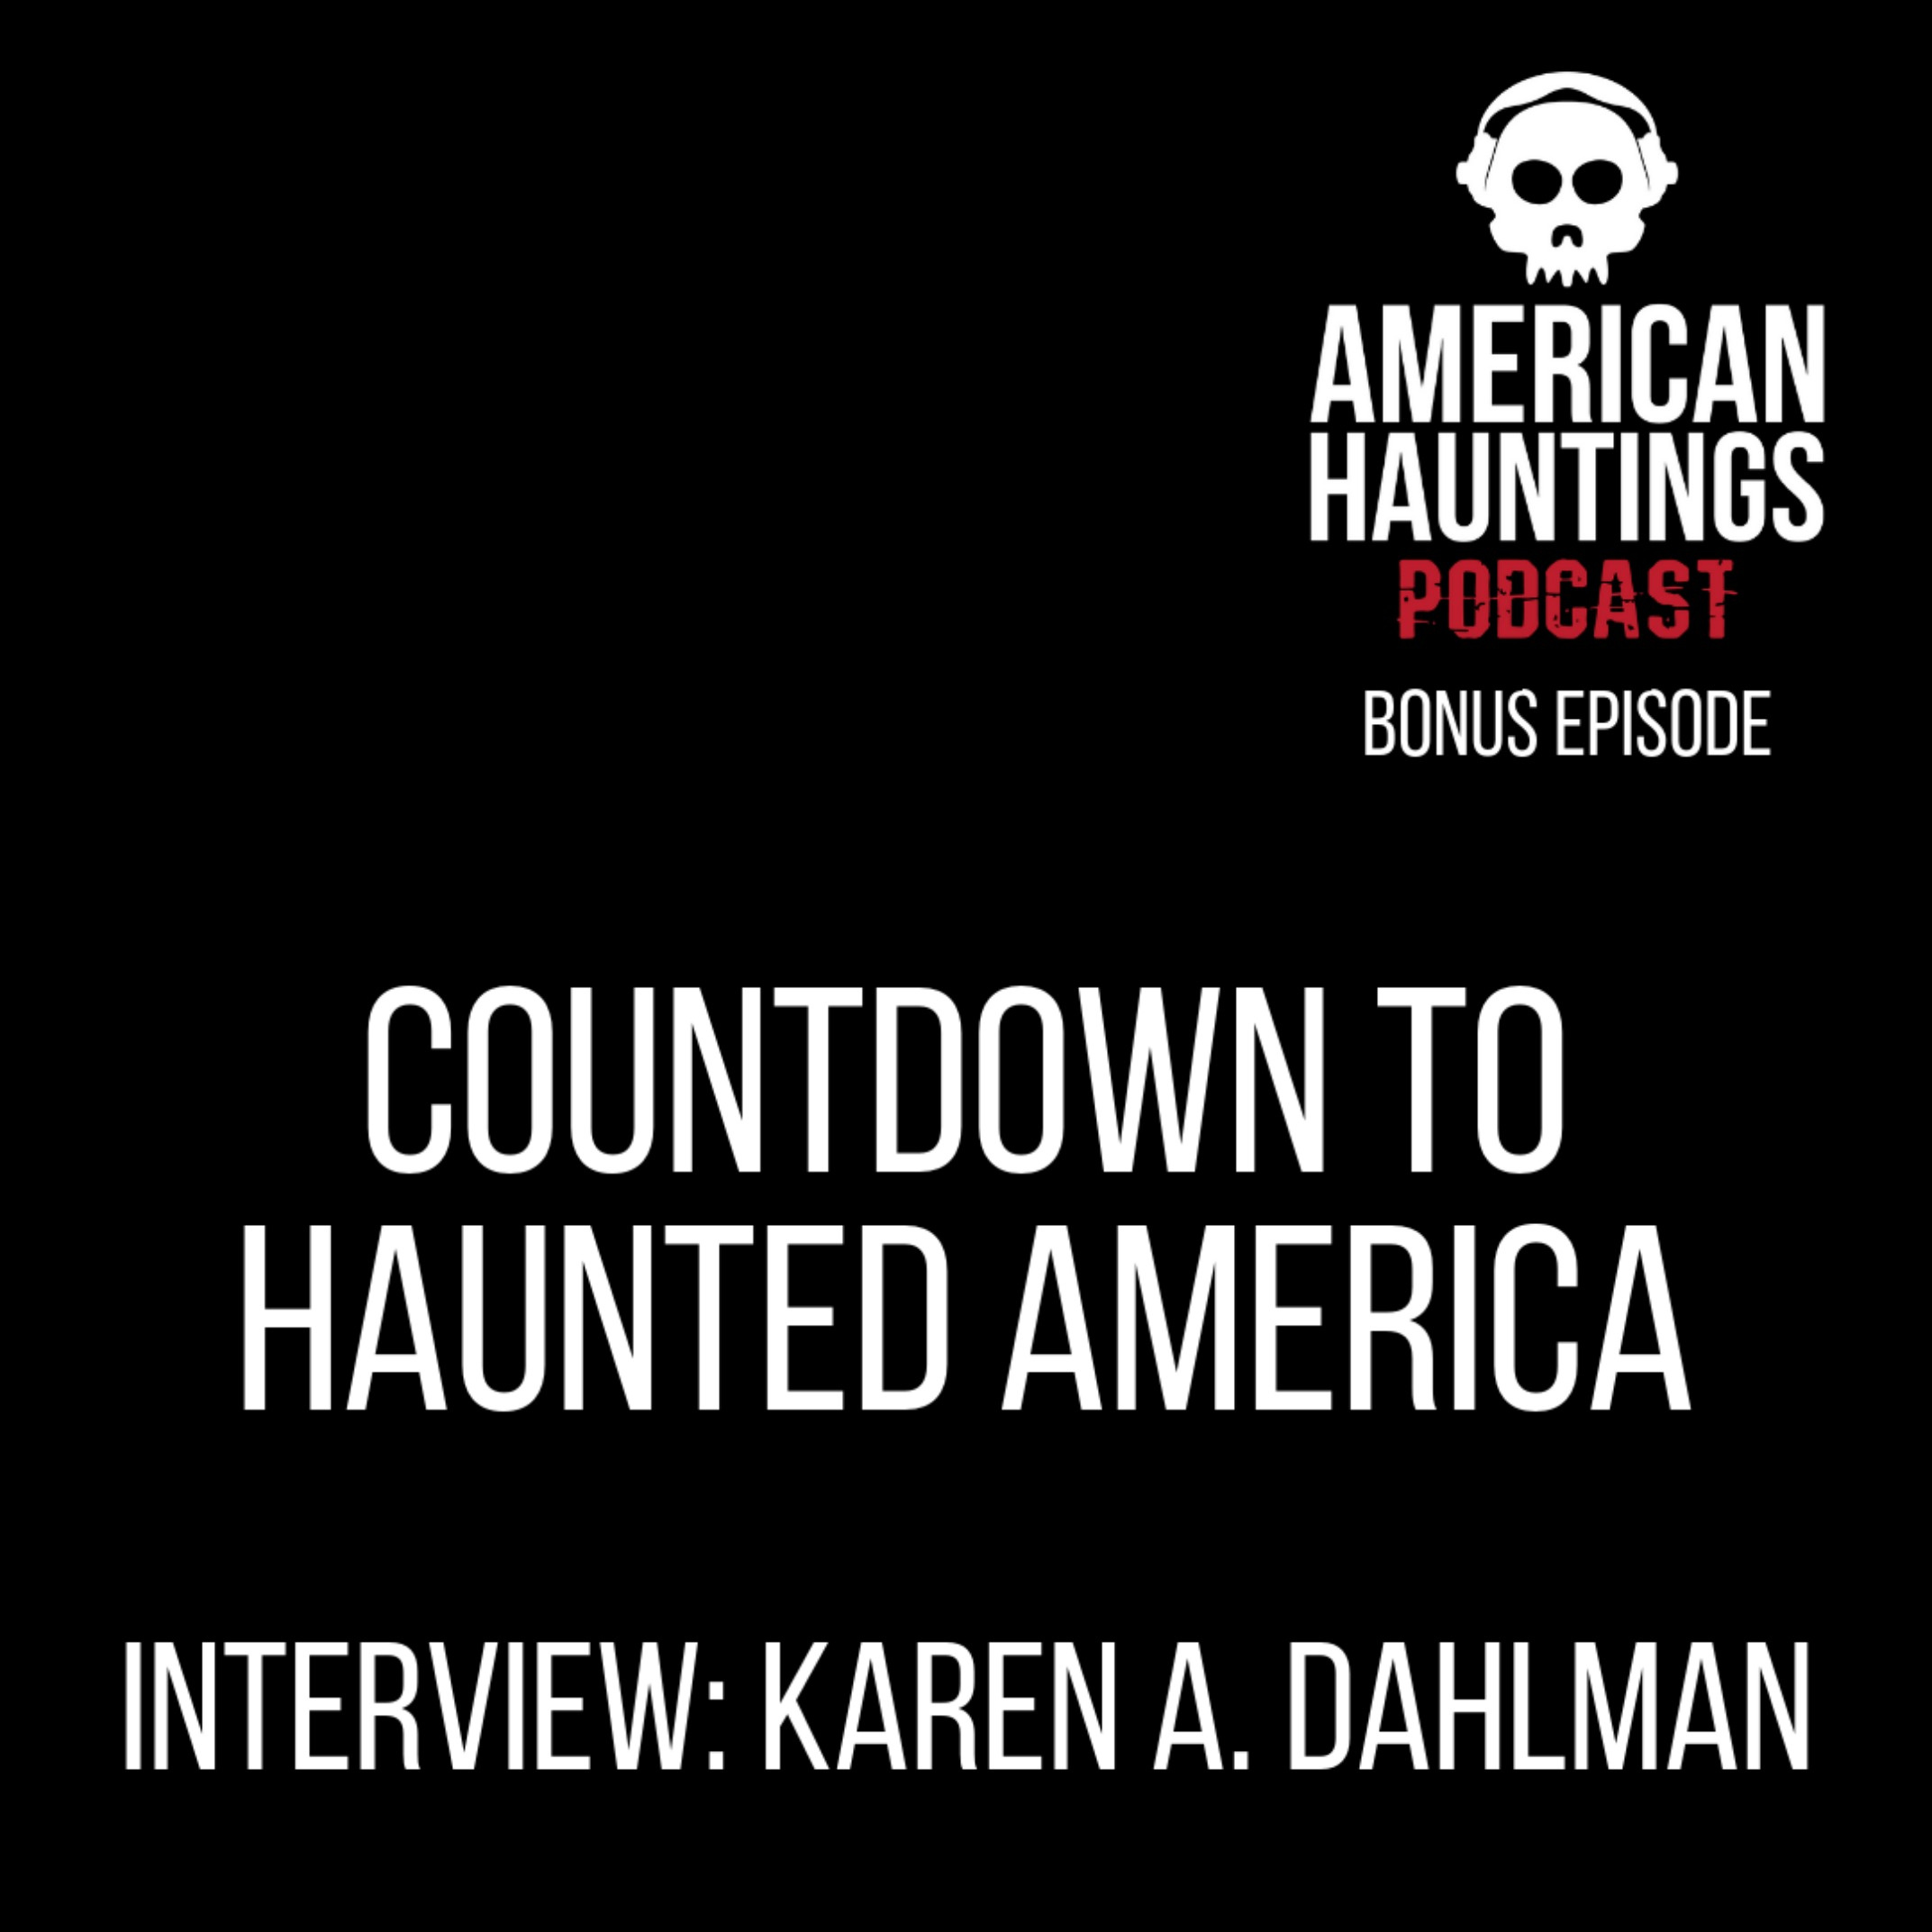 Interview with Karen A. Dahlman (Haunted America Conference)